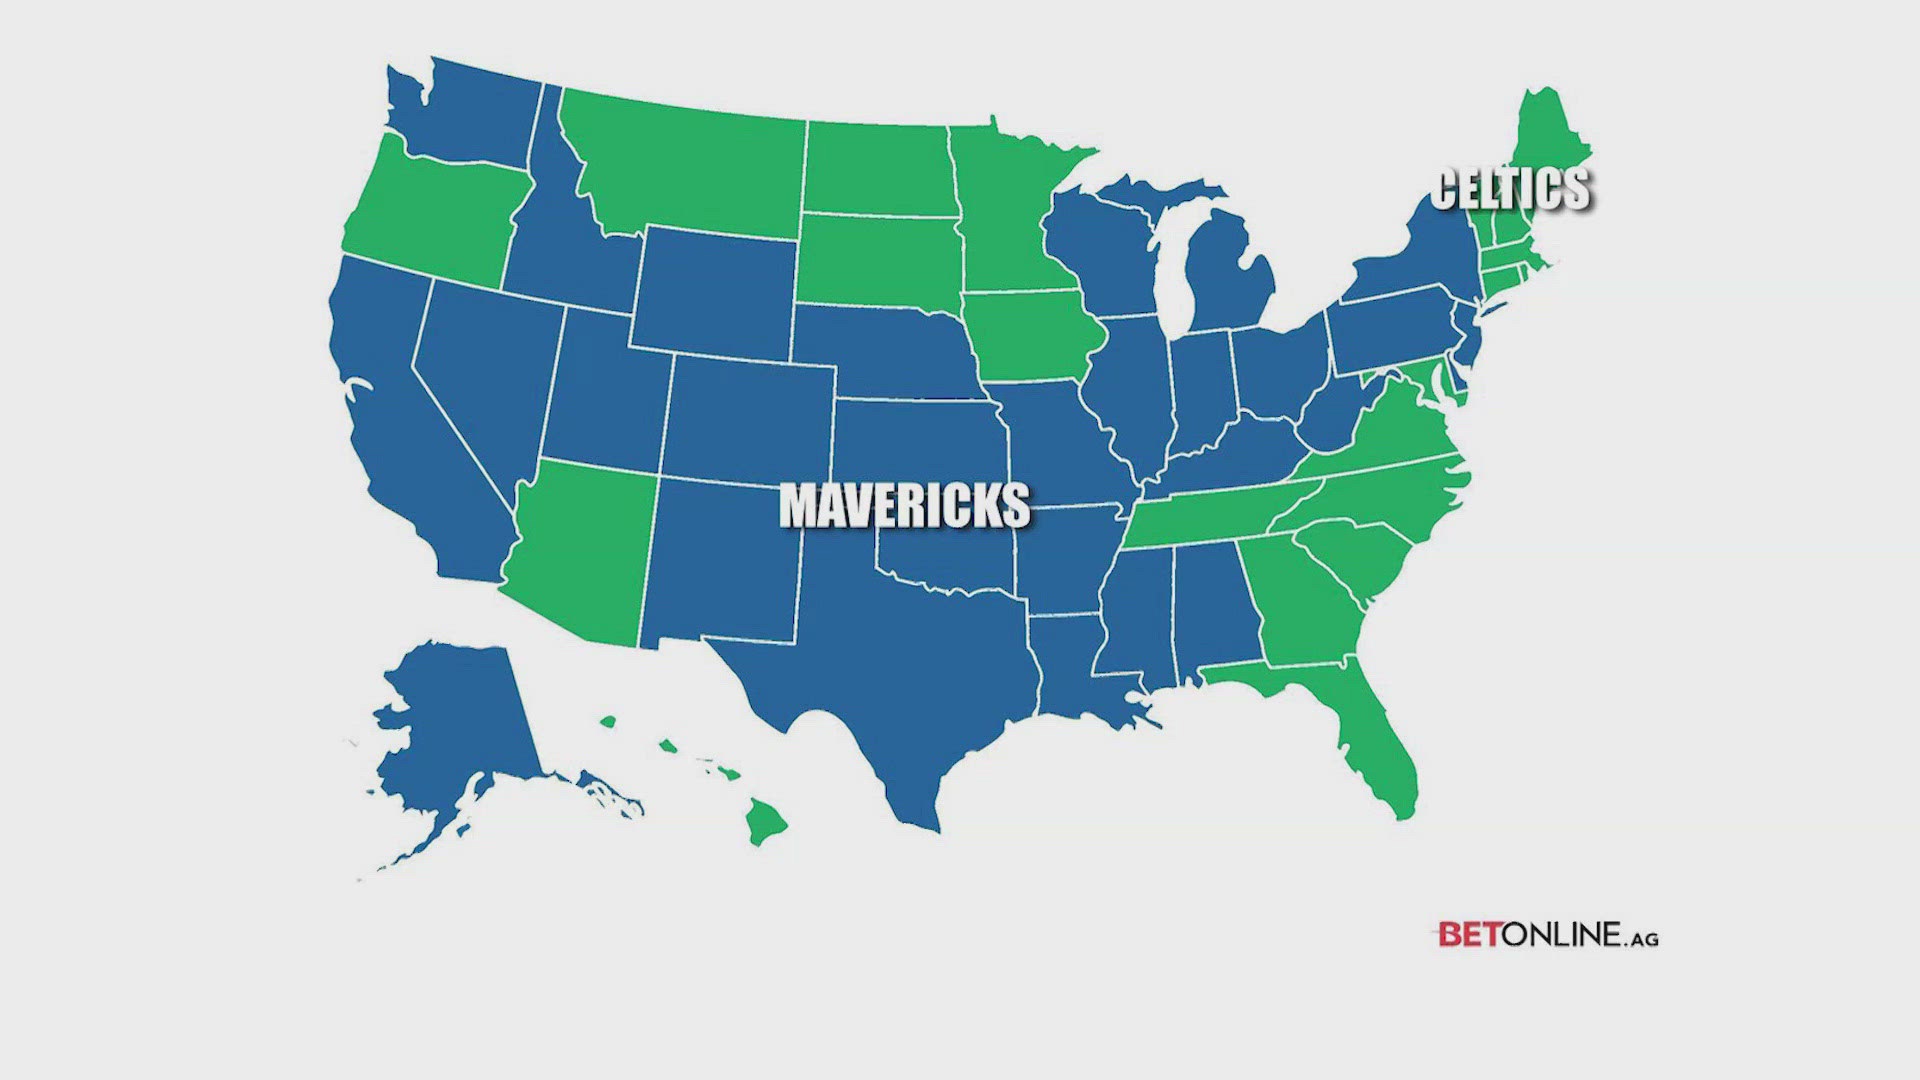 Basketball fans in over 20 states are rooting for the Mavs.